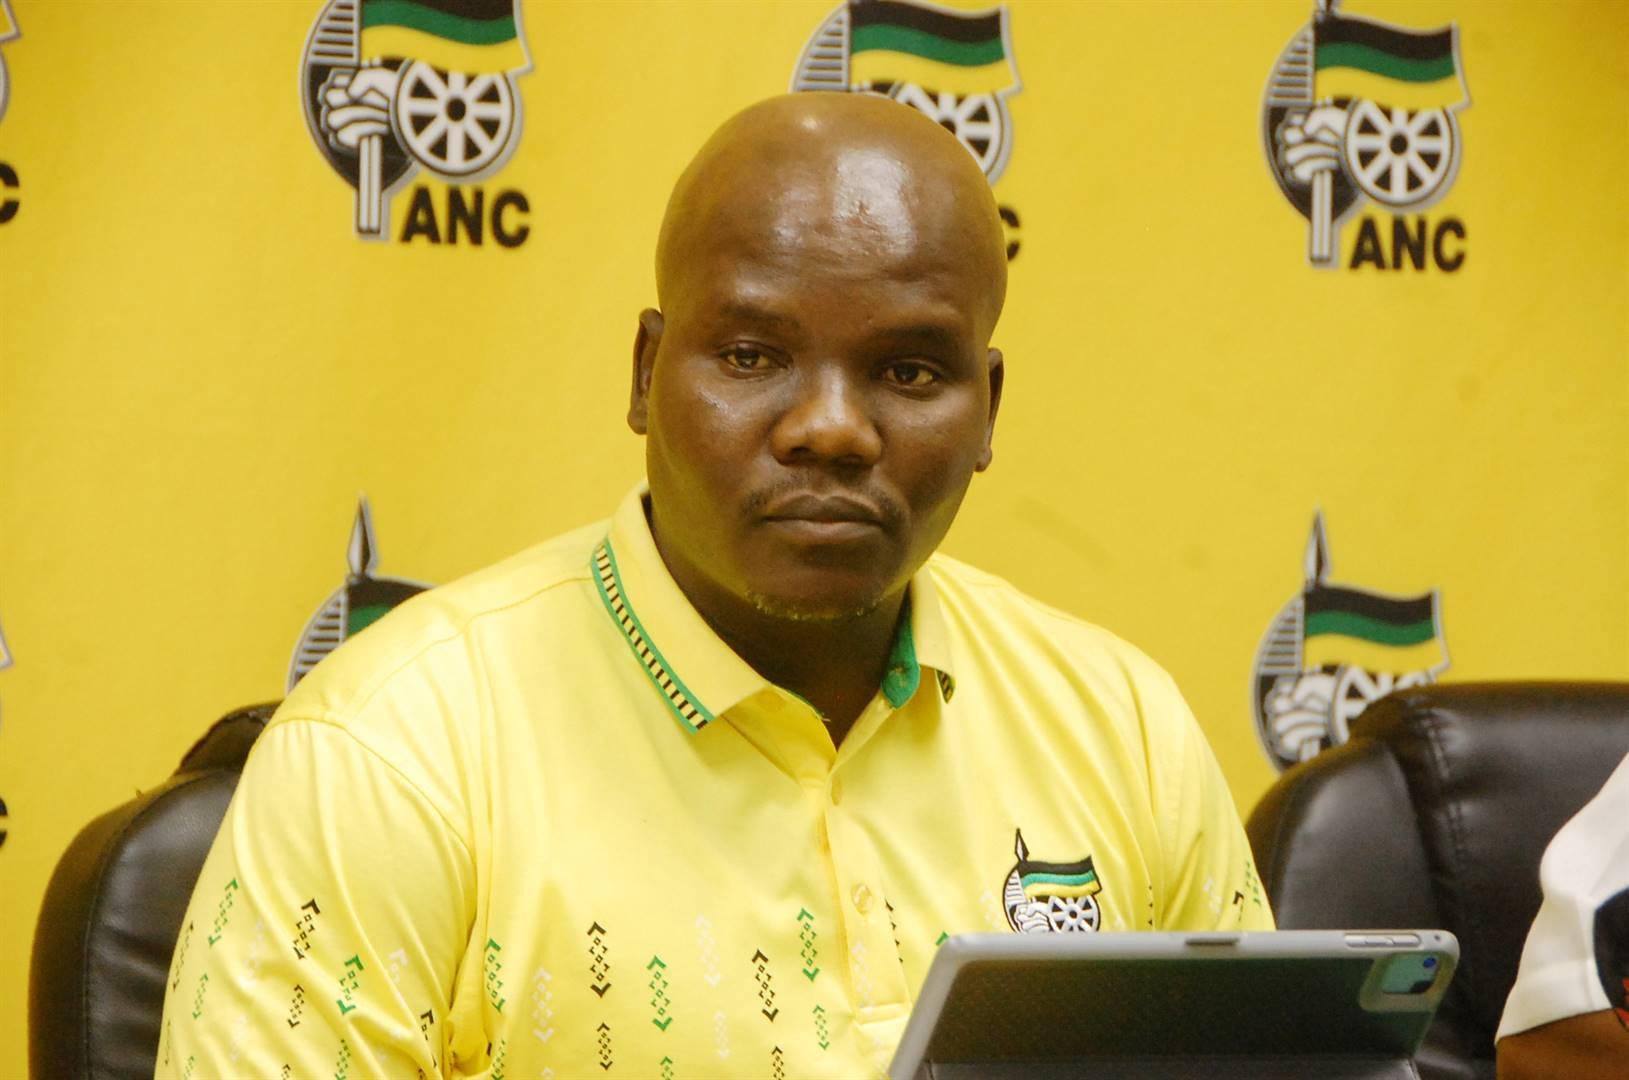 Numerous challenges threaten to postpone ANC's much anticipated KwaZulu-Natal conference